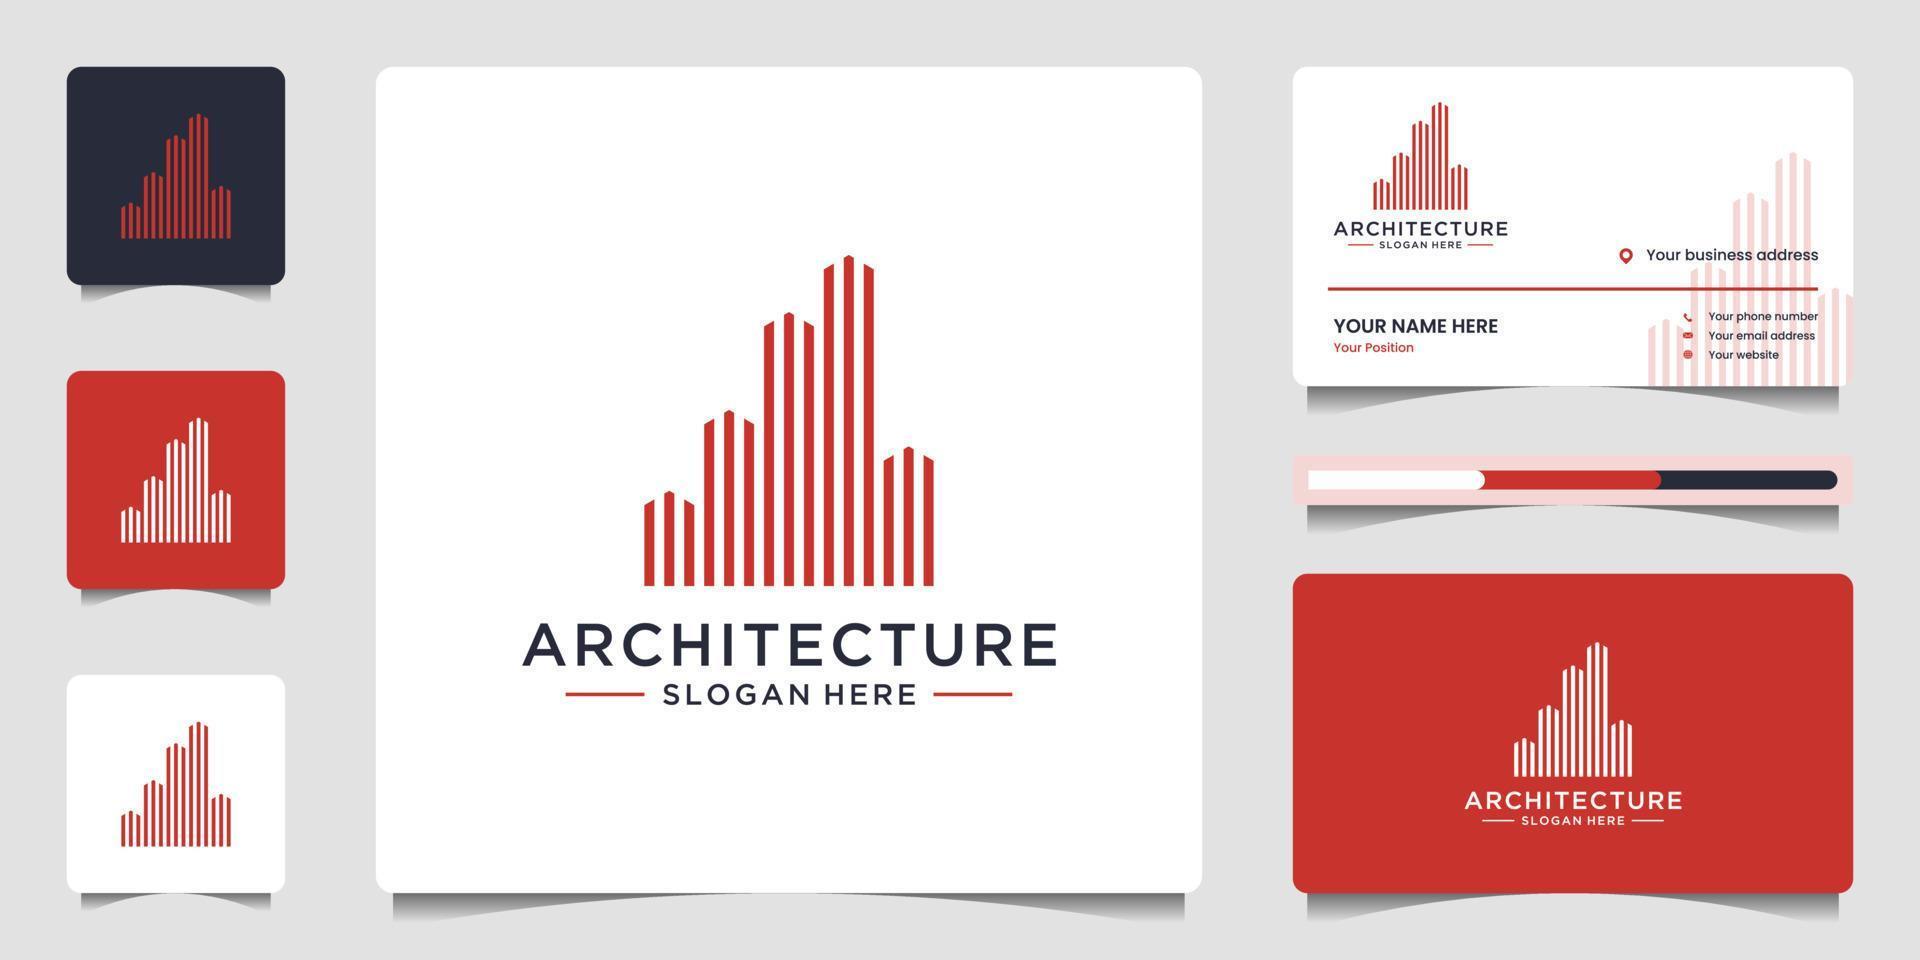 Building architecture logo with geometric shape logo design and business card template. vector